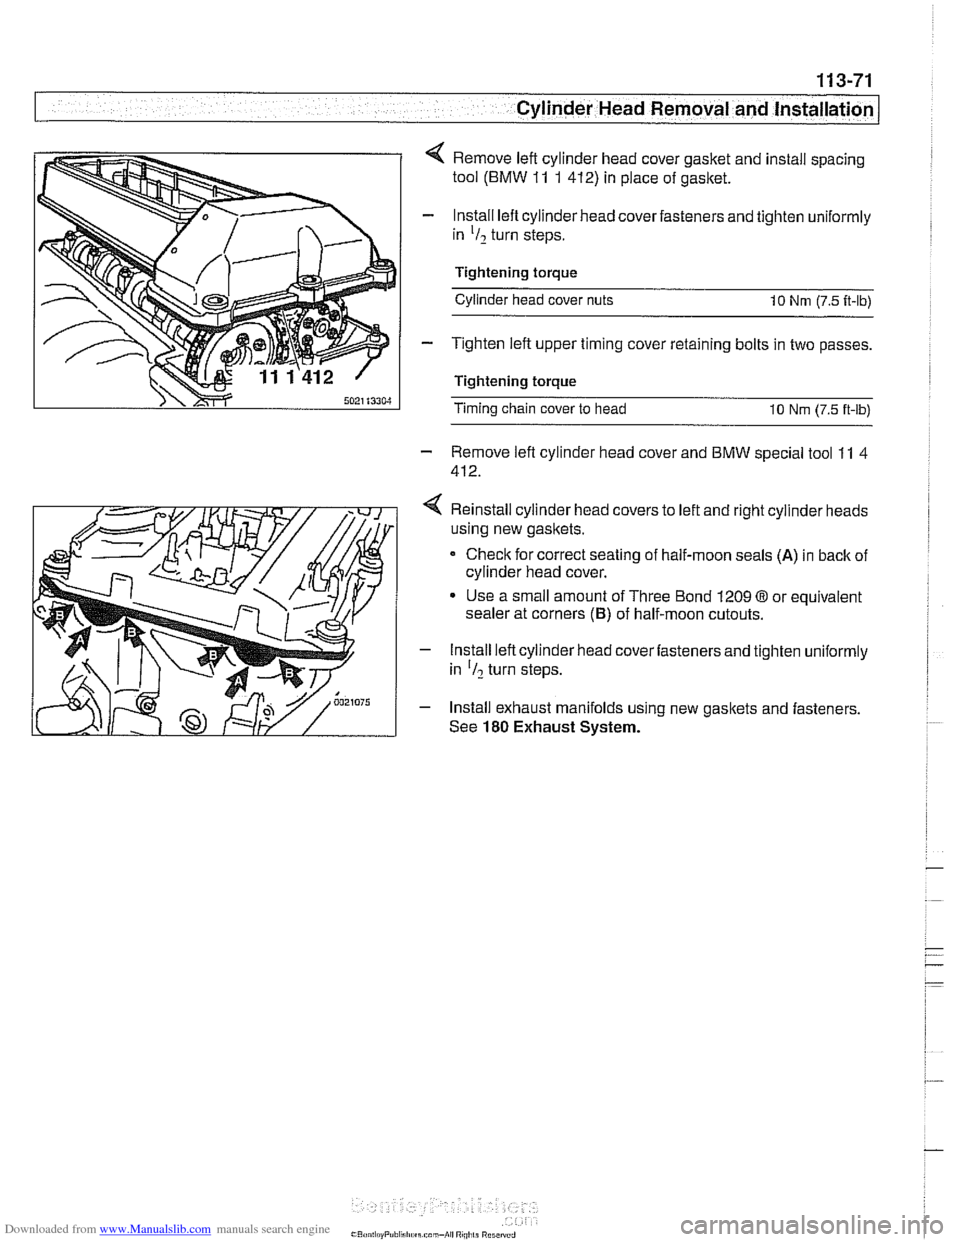 BMW 540i 1997 E39 User Guide Downloaded from www.Manualslib.com manuals search engine 
. ." . . 
I - Cylinder Head Removal - and instard -- 
4 Remove left cylinder  head cover gasket  and install  spacing 
tool  (BMW 
11 1 412)  